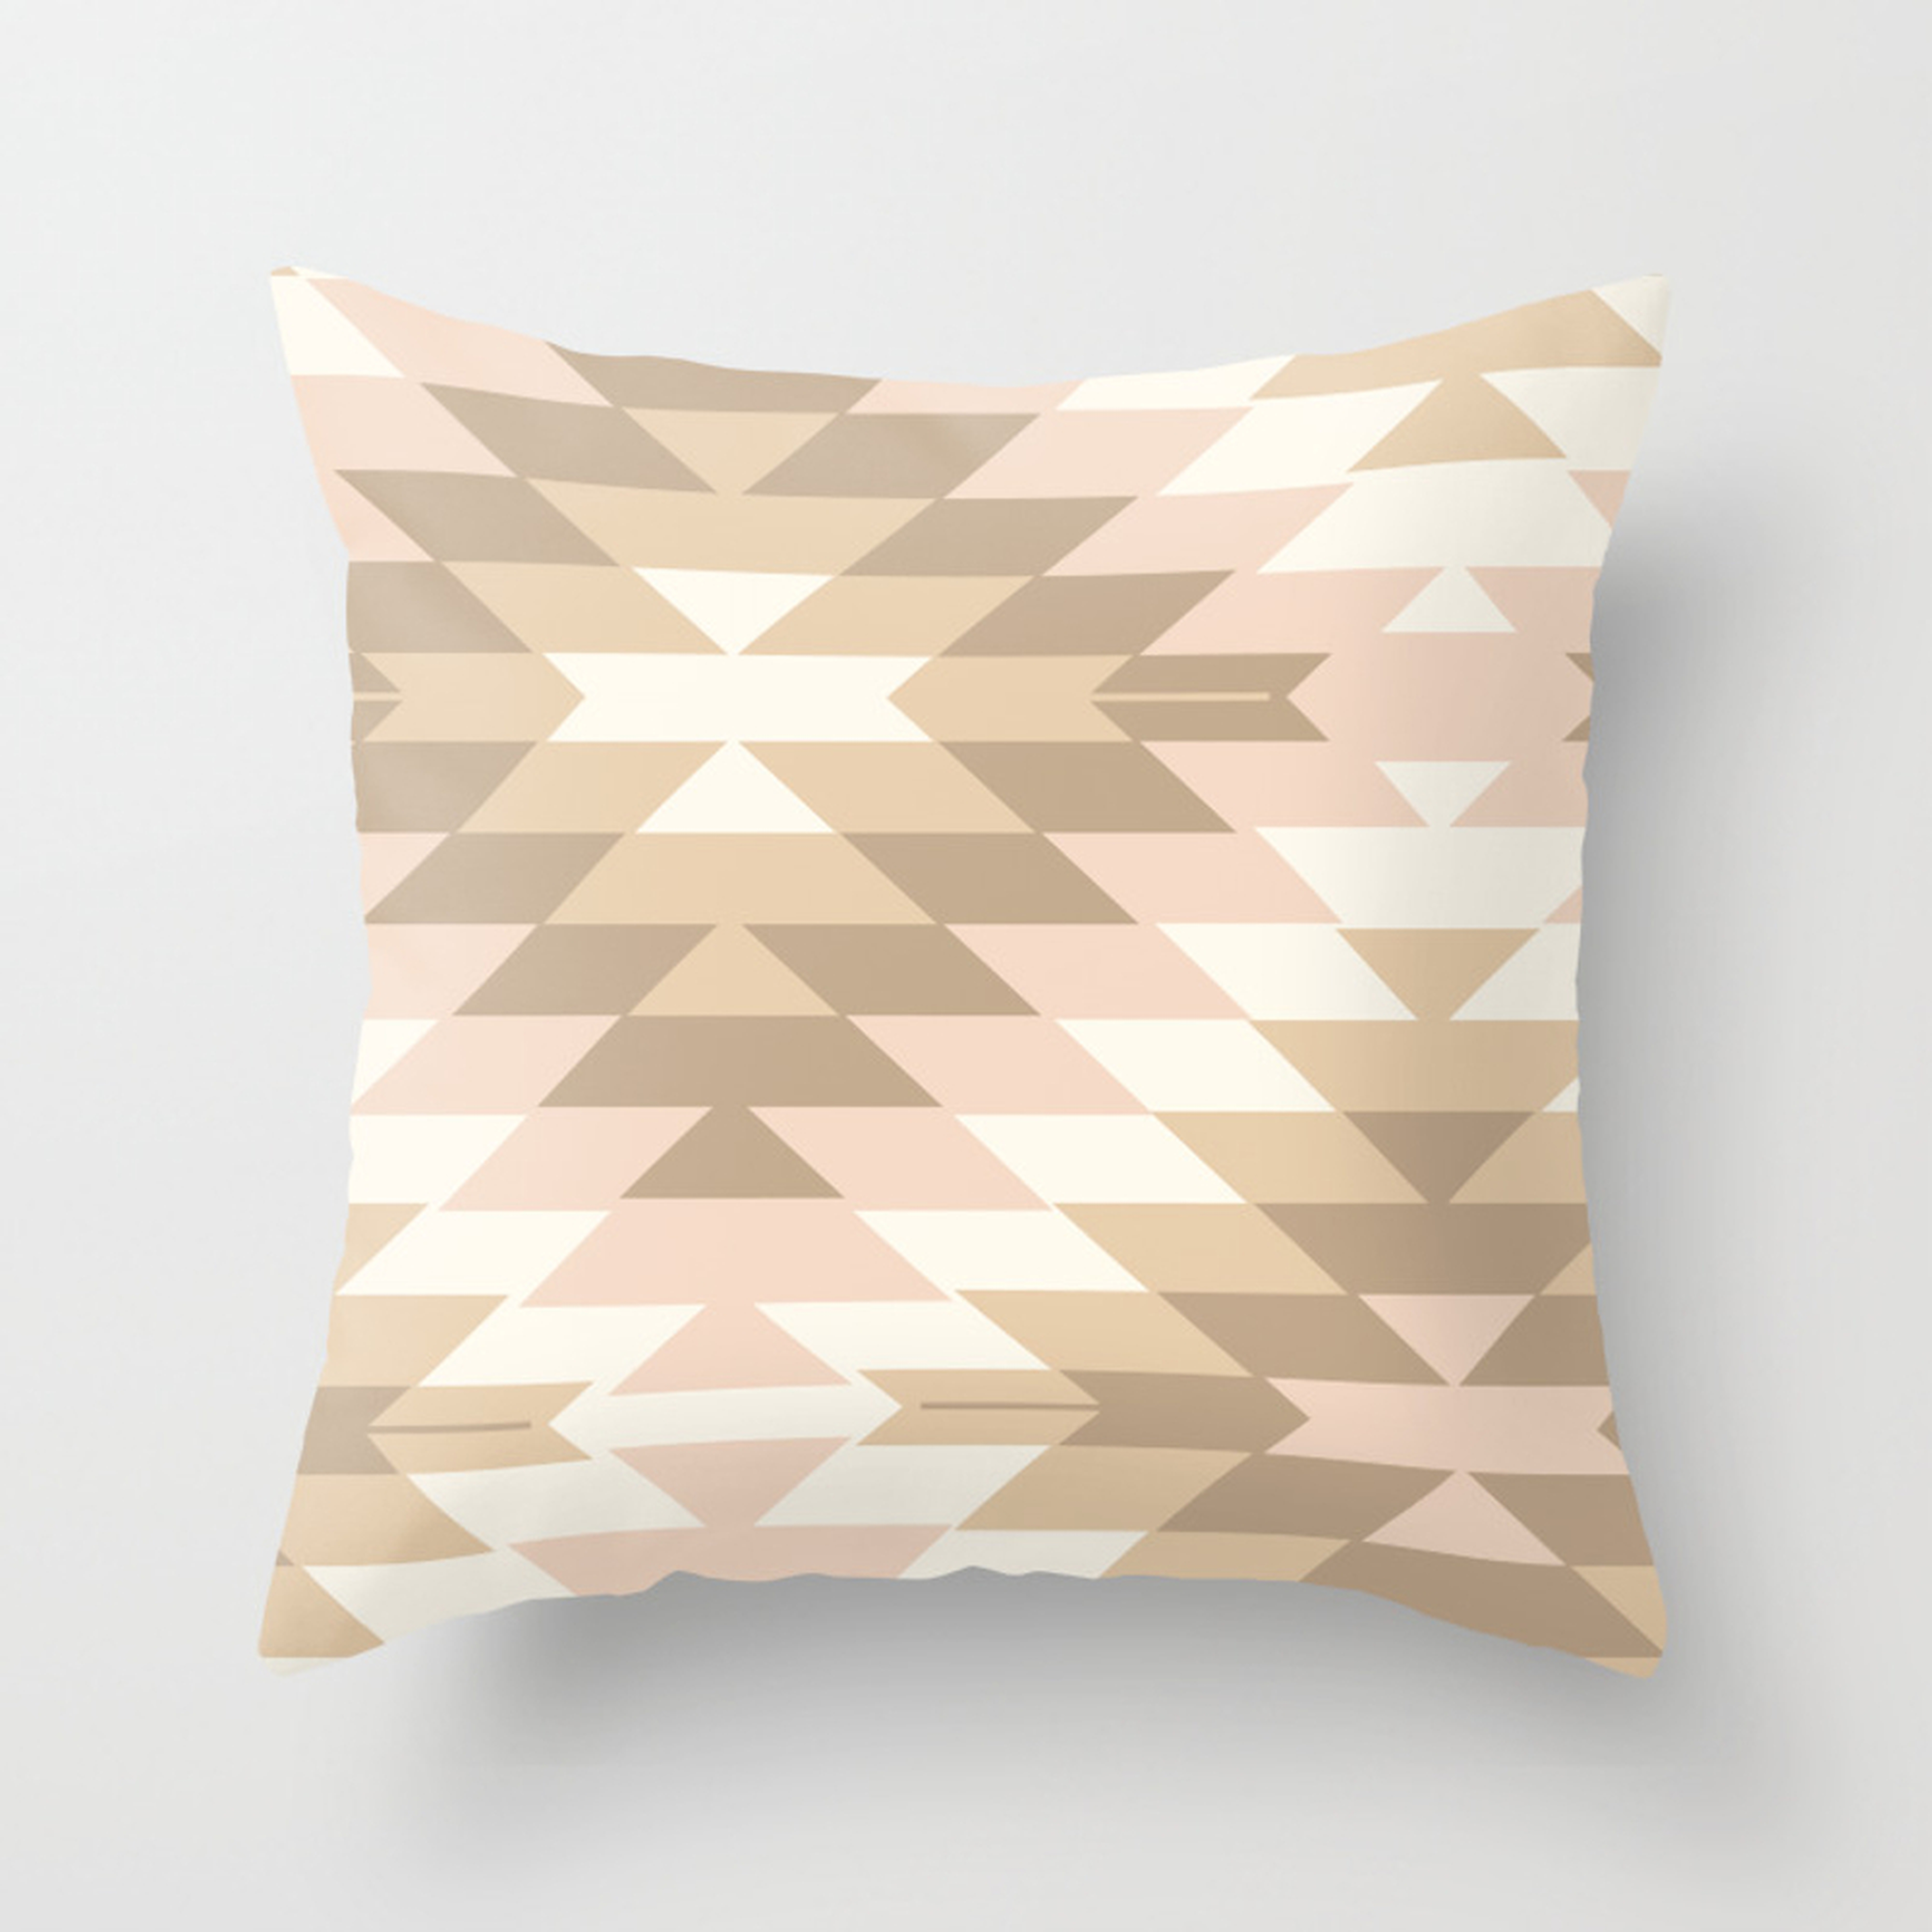 San Pedro in Tan Throw Pillow - Indoor Cover (18" x 18") with pillow insert by Beckybailey1 - Society6